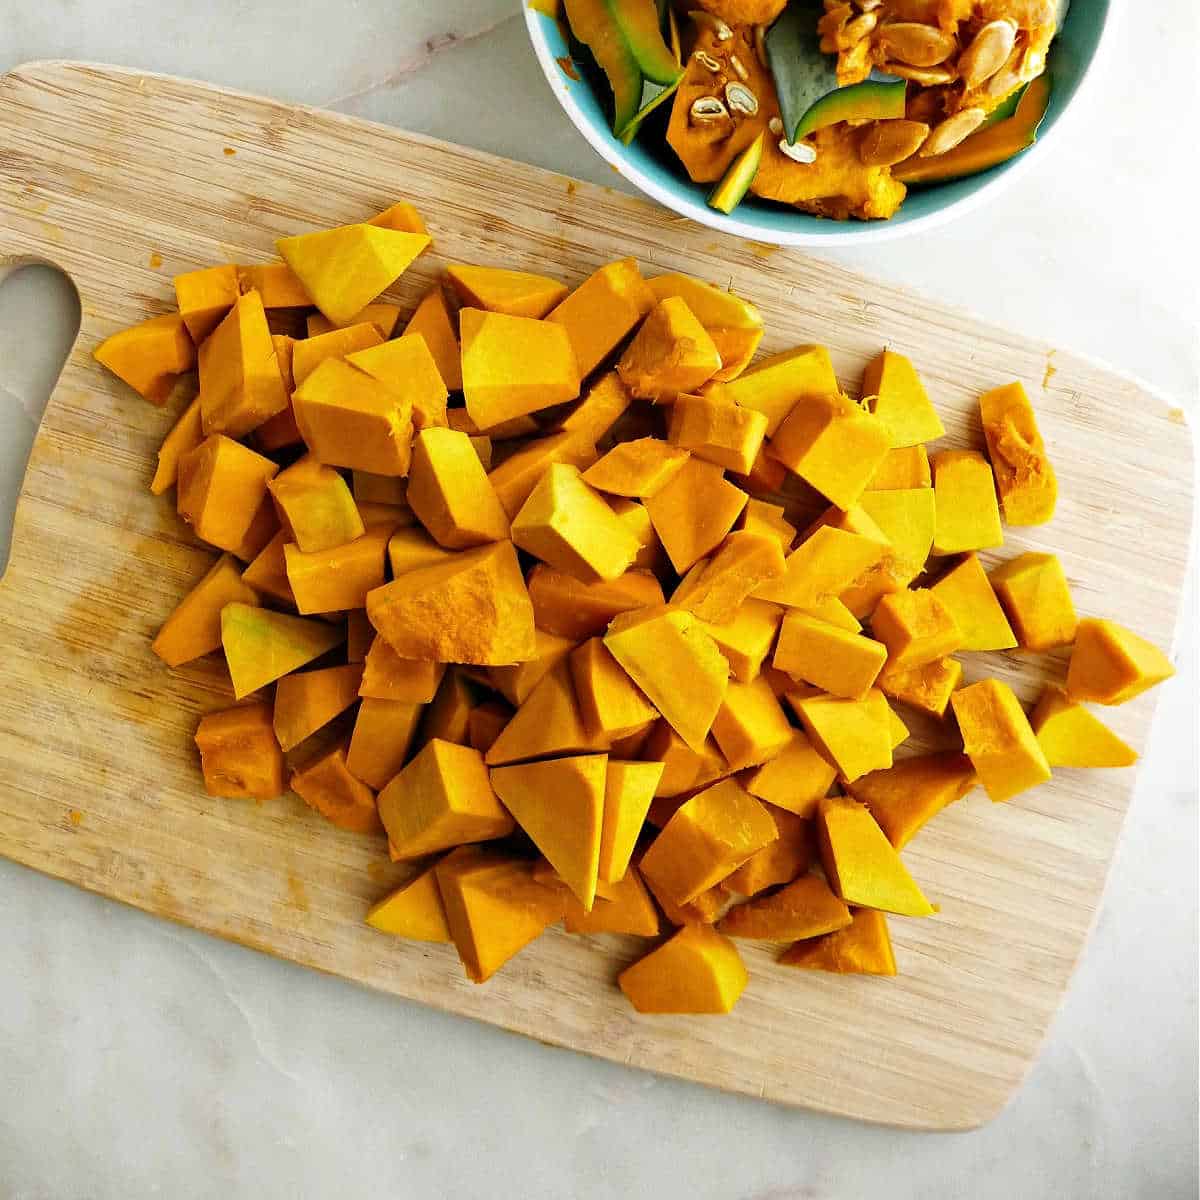 kabocha squash diced into cubes on a cutting board on a counter